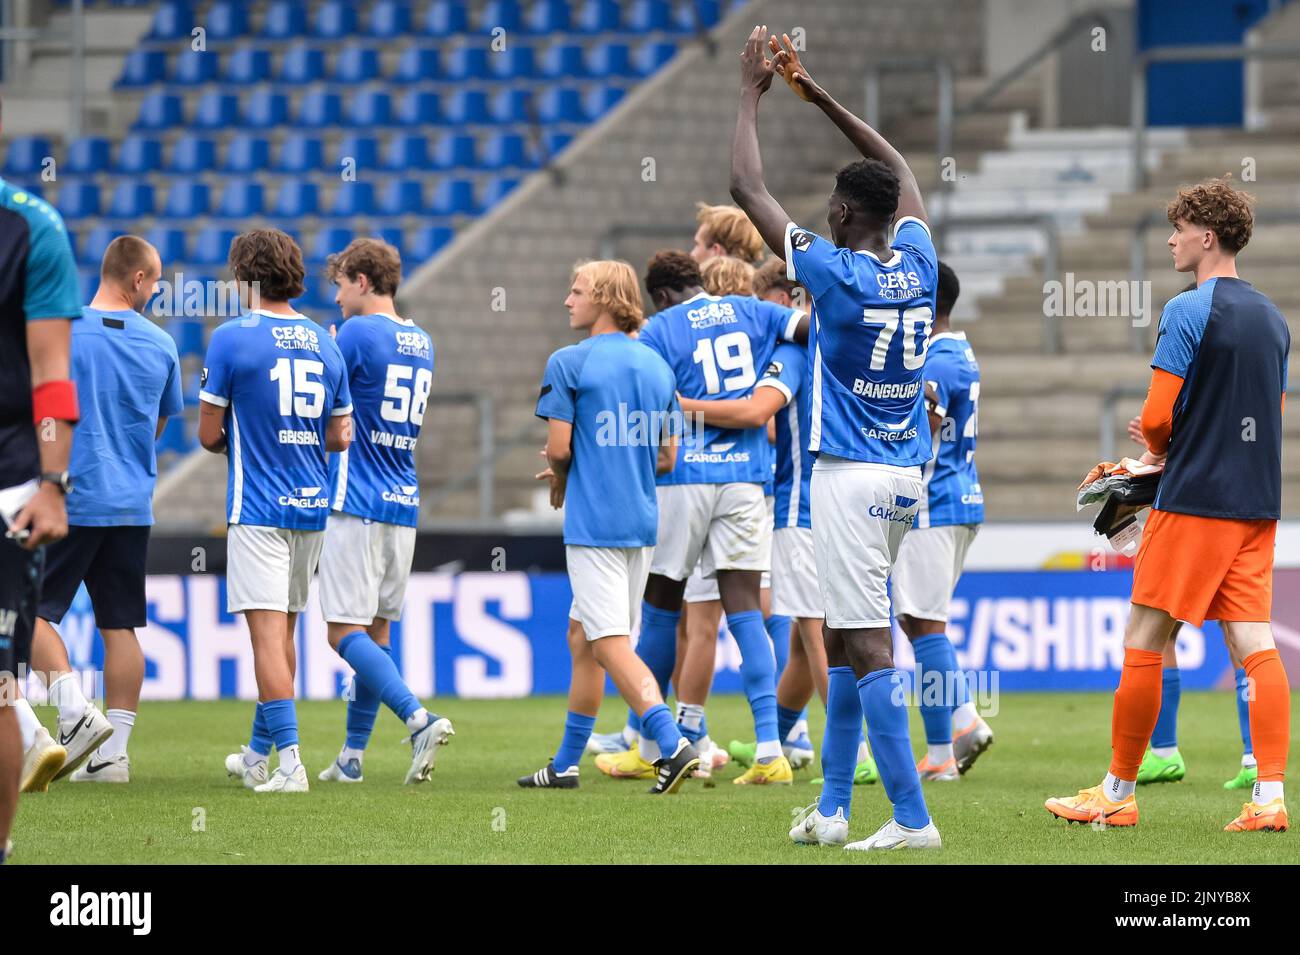 Jong Genk's Ibrahima Sory Bangoura celebrates after scoring during a soccer match between Jong Genk and Lierse Kempenzonen, Sunday 14 August 2022 in Genk, on day 1 of the 2022-2023 'Challenger Pro League' second division of the Belgian championship. BELGA PHOTO JILL DELSAUX Stock Photo